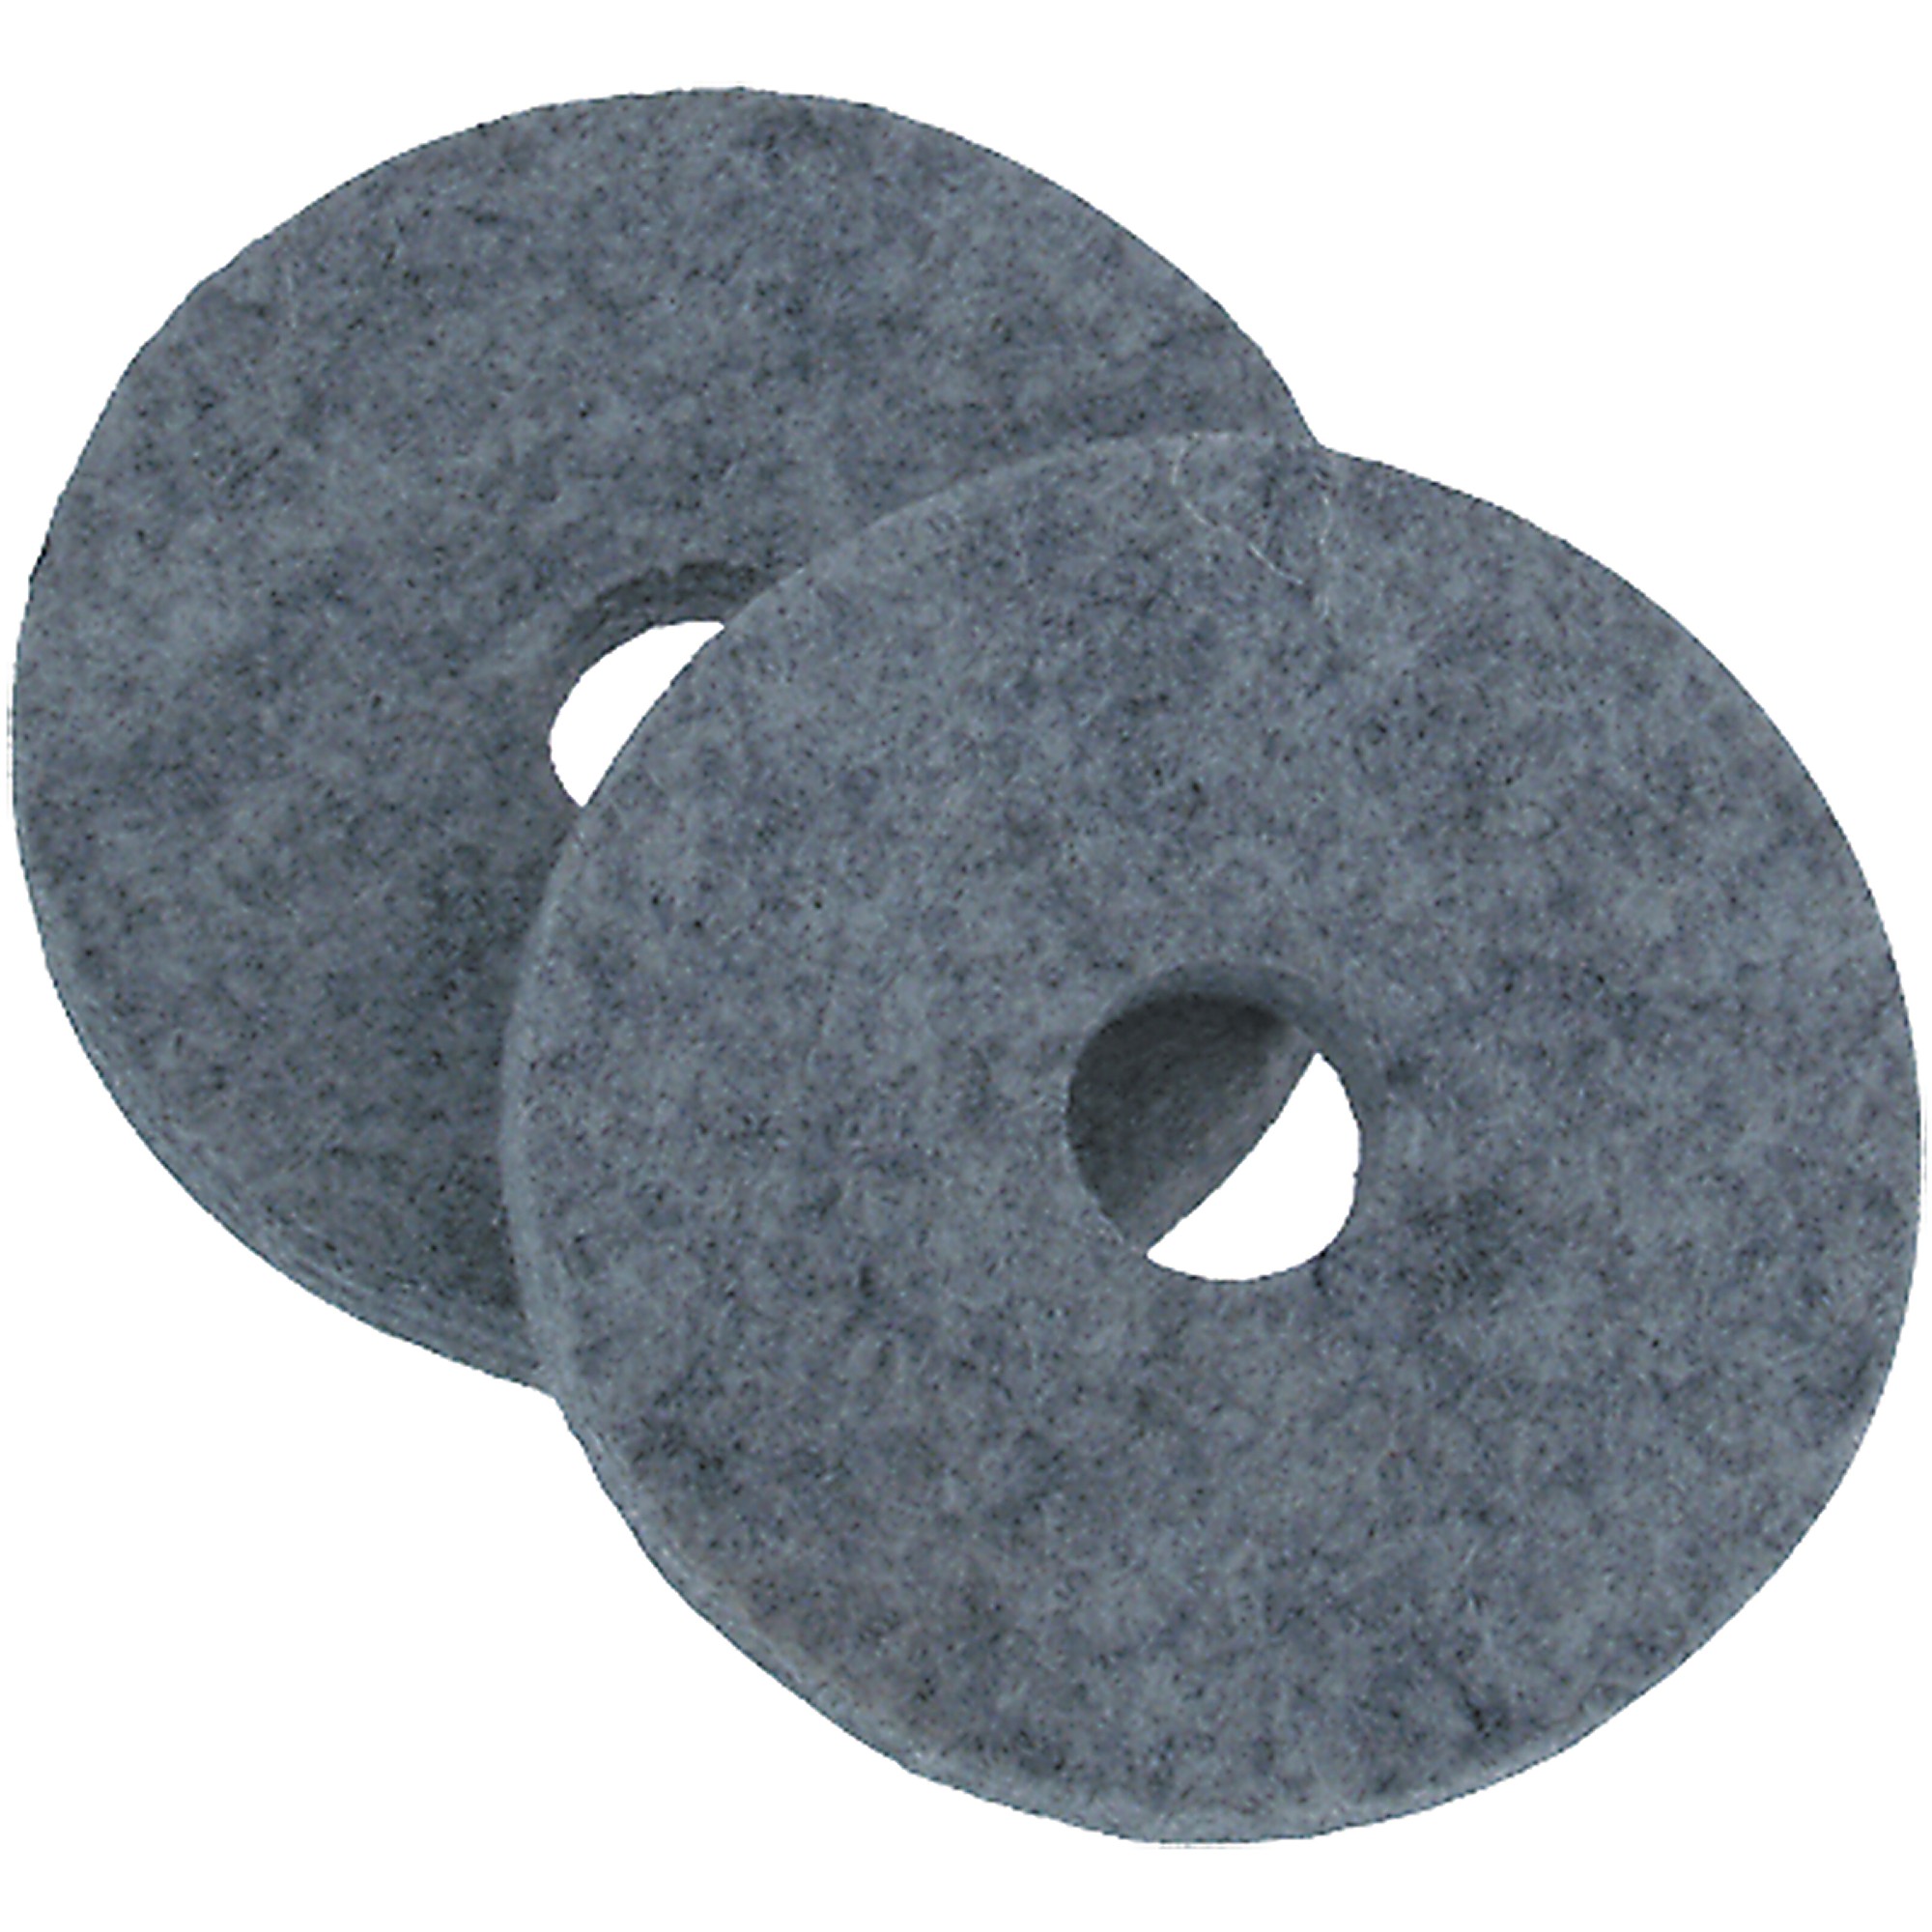 BQLZR Cymbal Replacement Accessories Cymbal Felts Hi-Hat Clutch Felt Pack of 5 